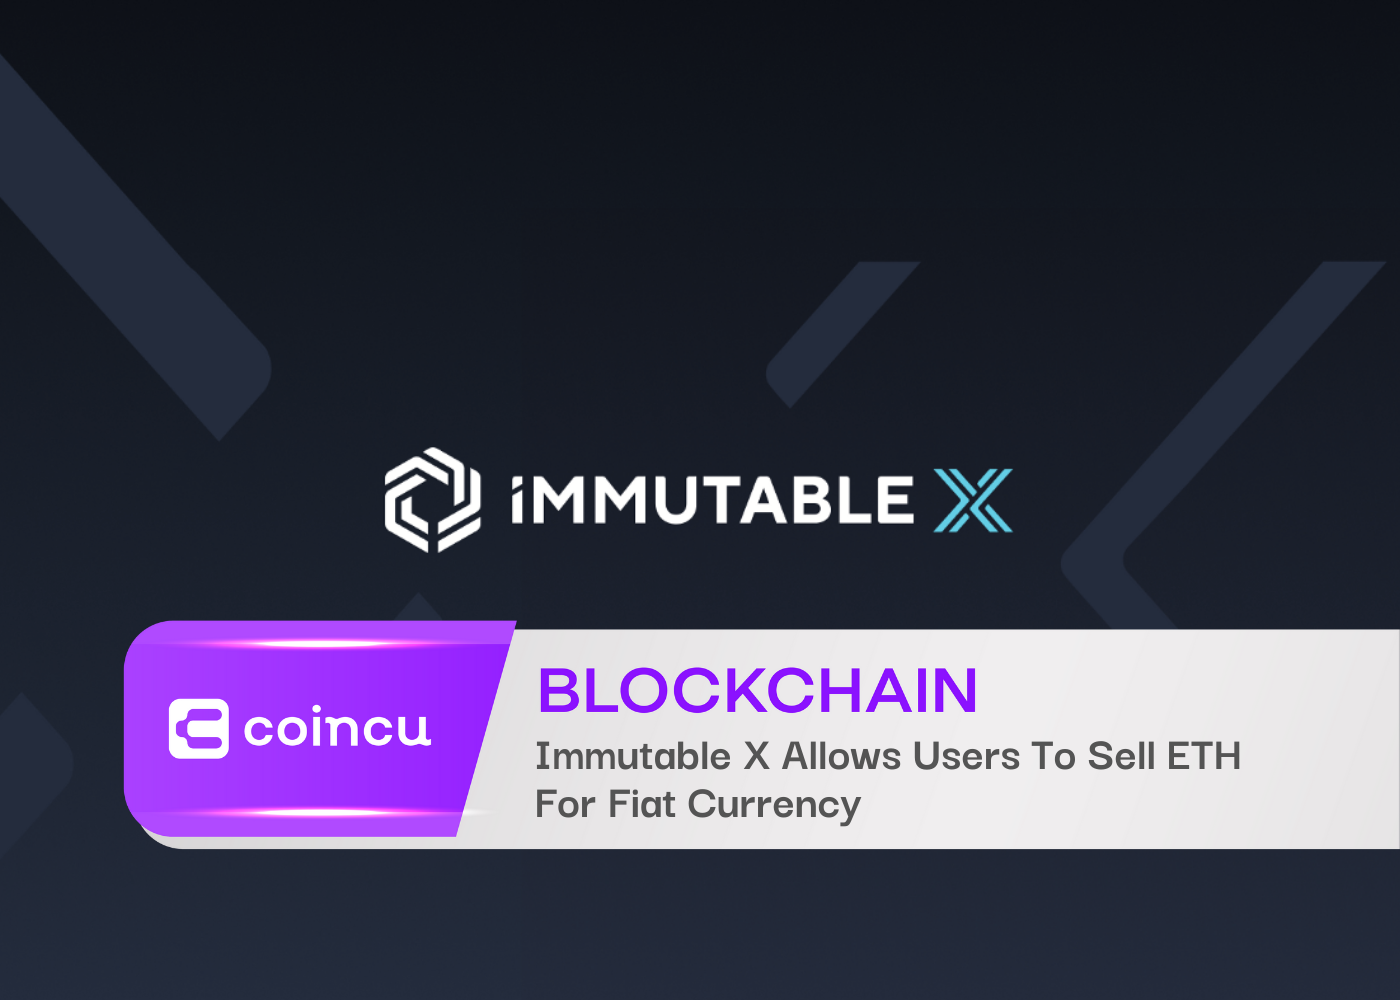 Immutable X Allows Users To Sell ETH For Fiat Currency